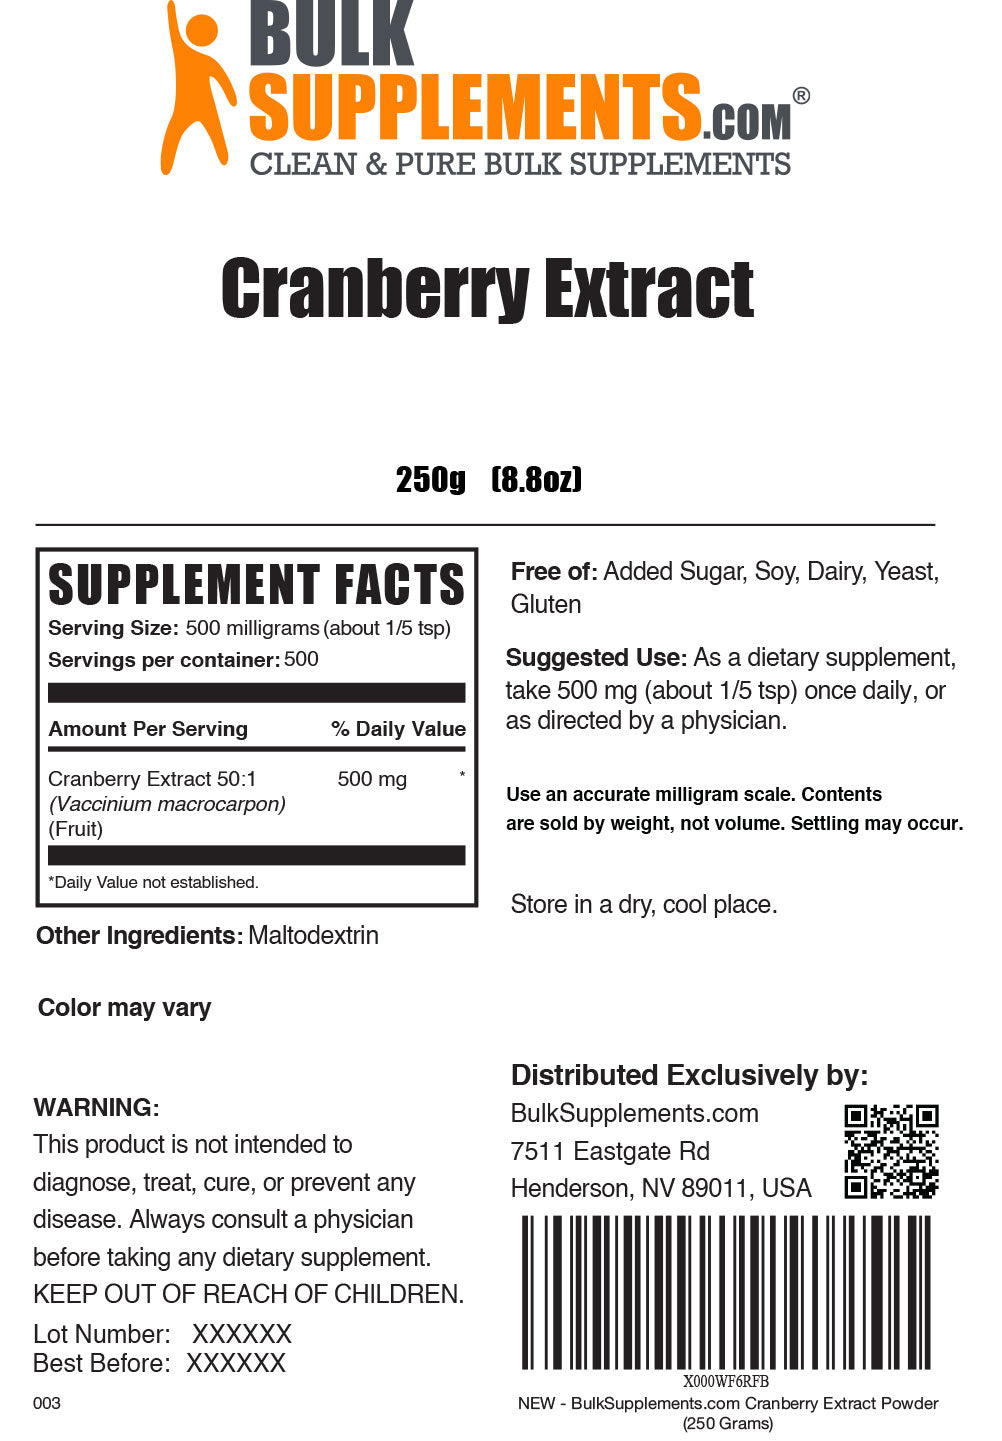 250g Cranberry Extract Supplement Facts